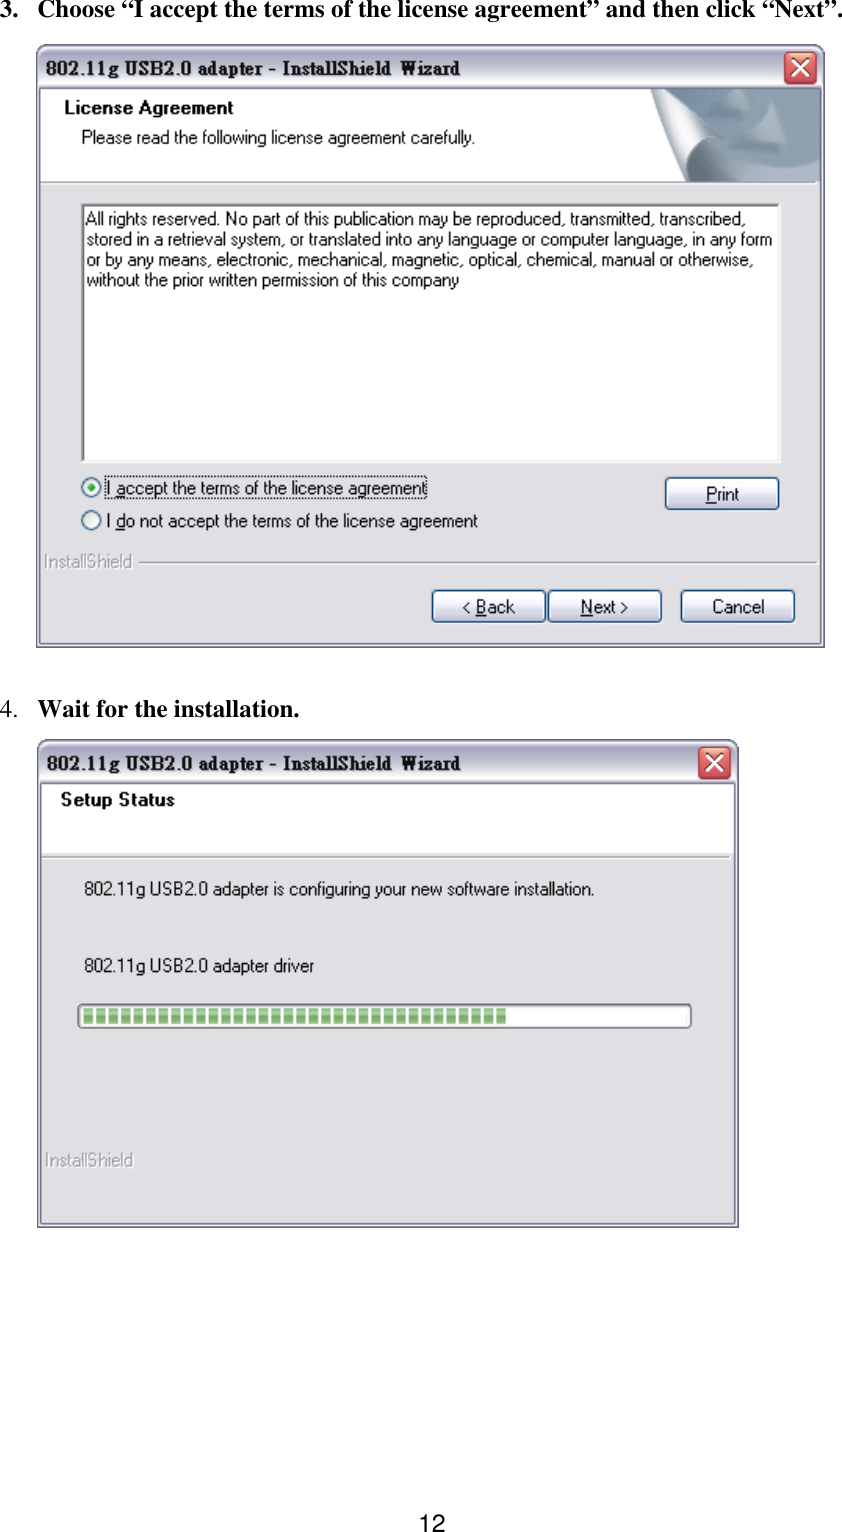  123.  Choose “I accept the terms of the license agreement” and then click “Next”.  4.  Wait for the installation.  